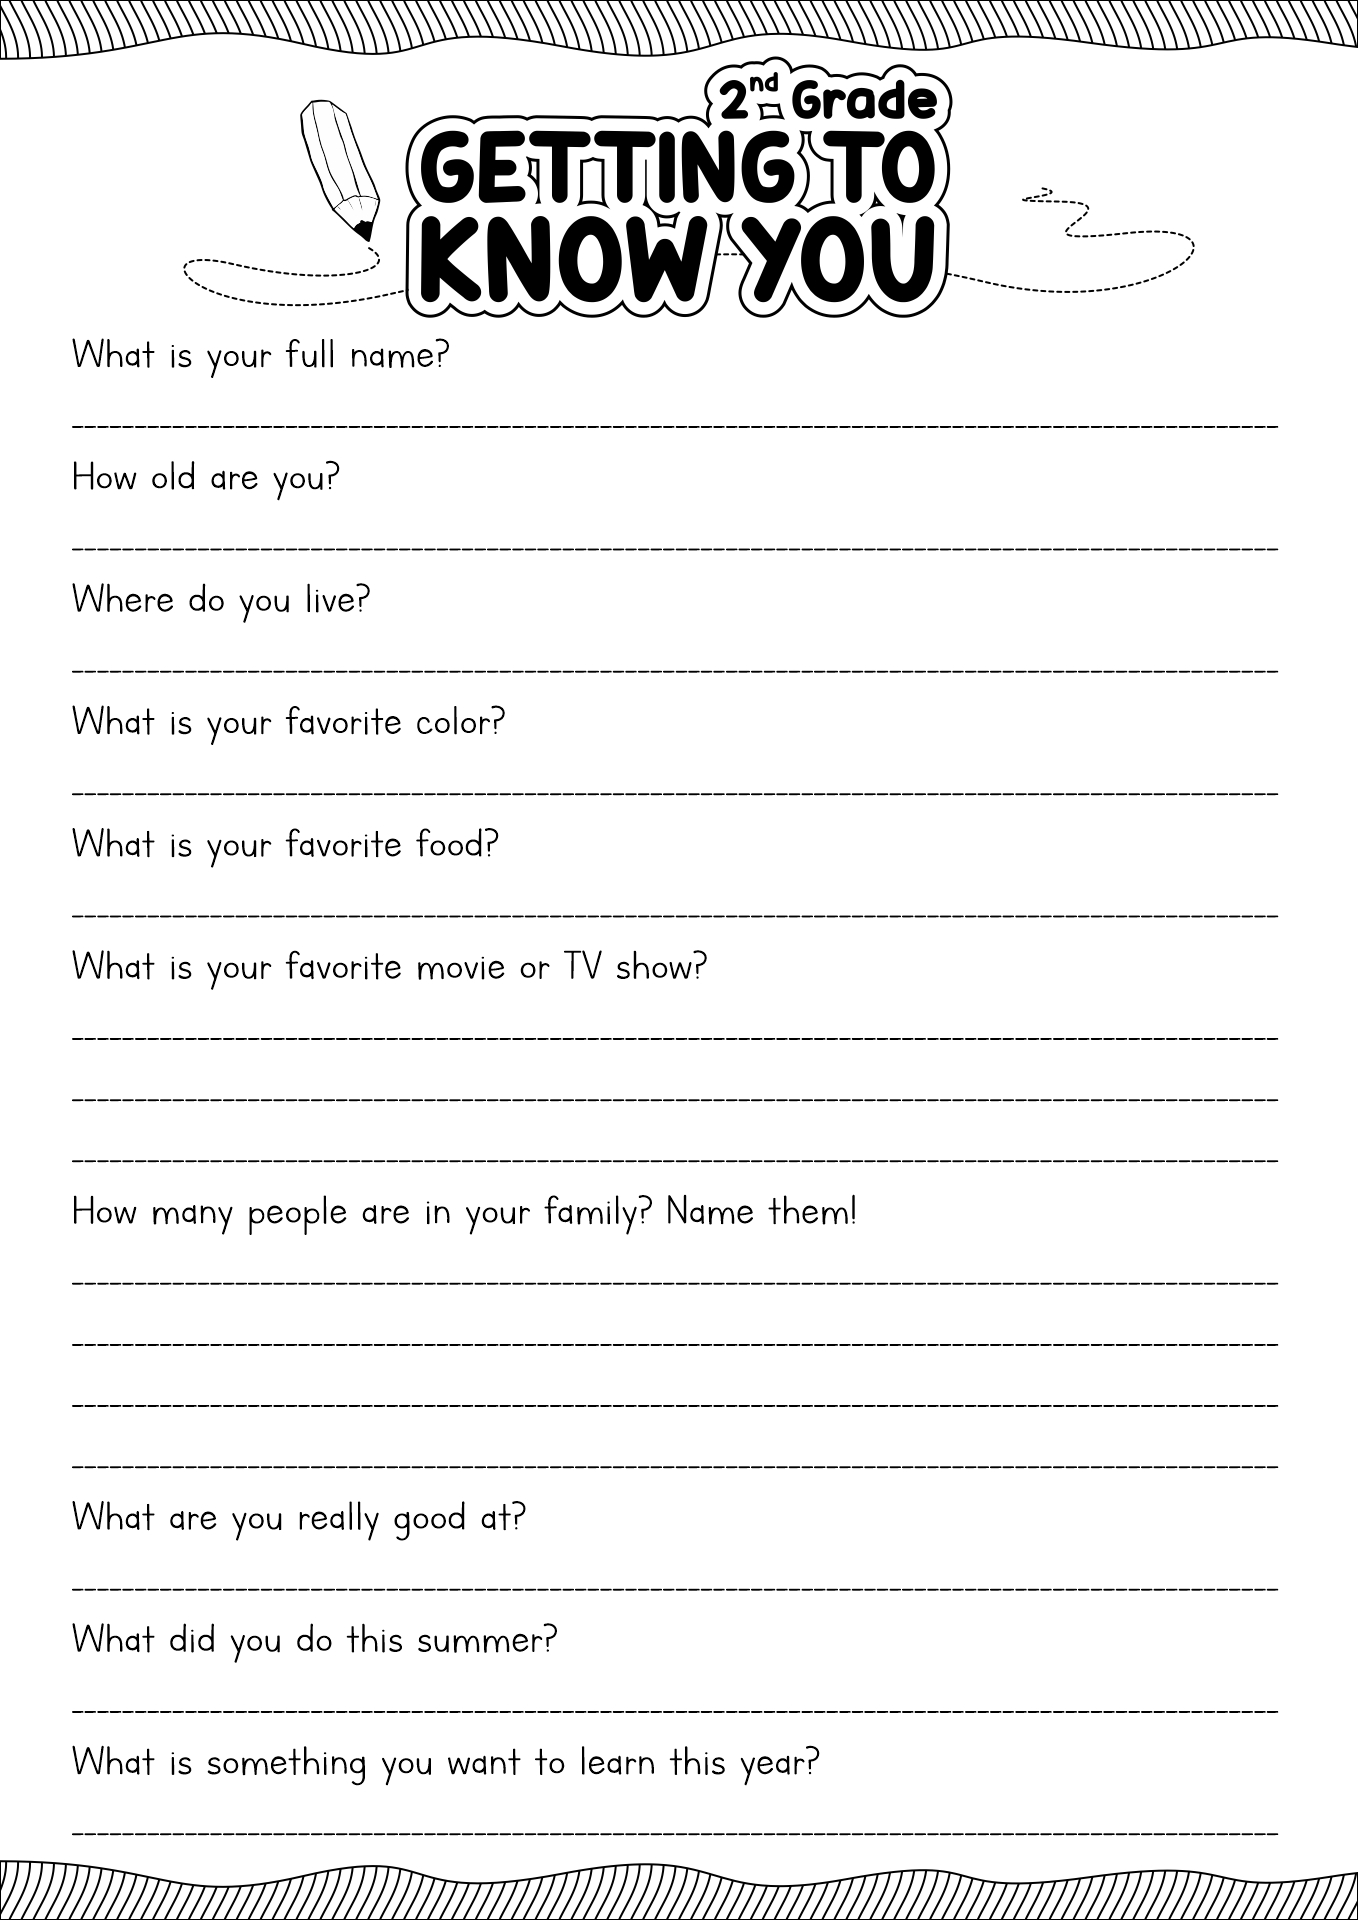 Free Printable Getting To Know You Worksheets